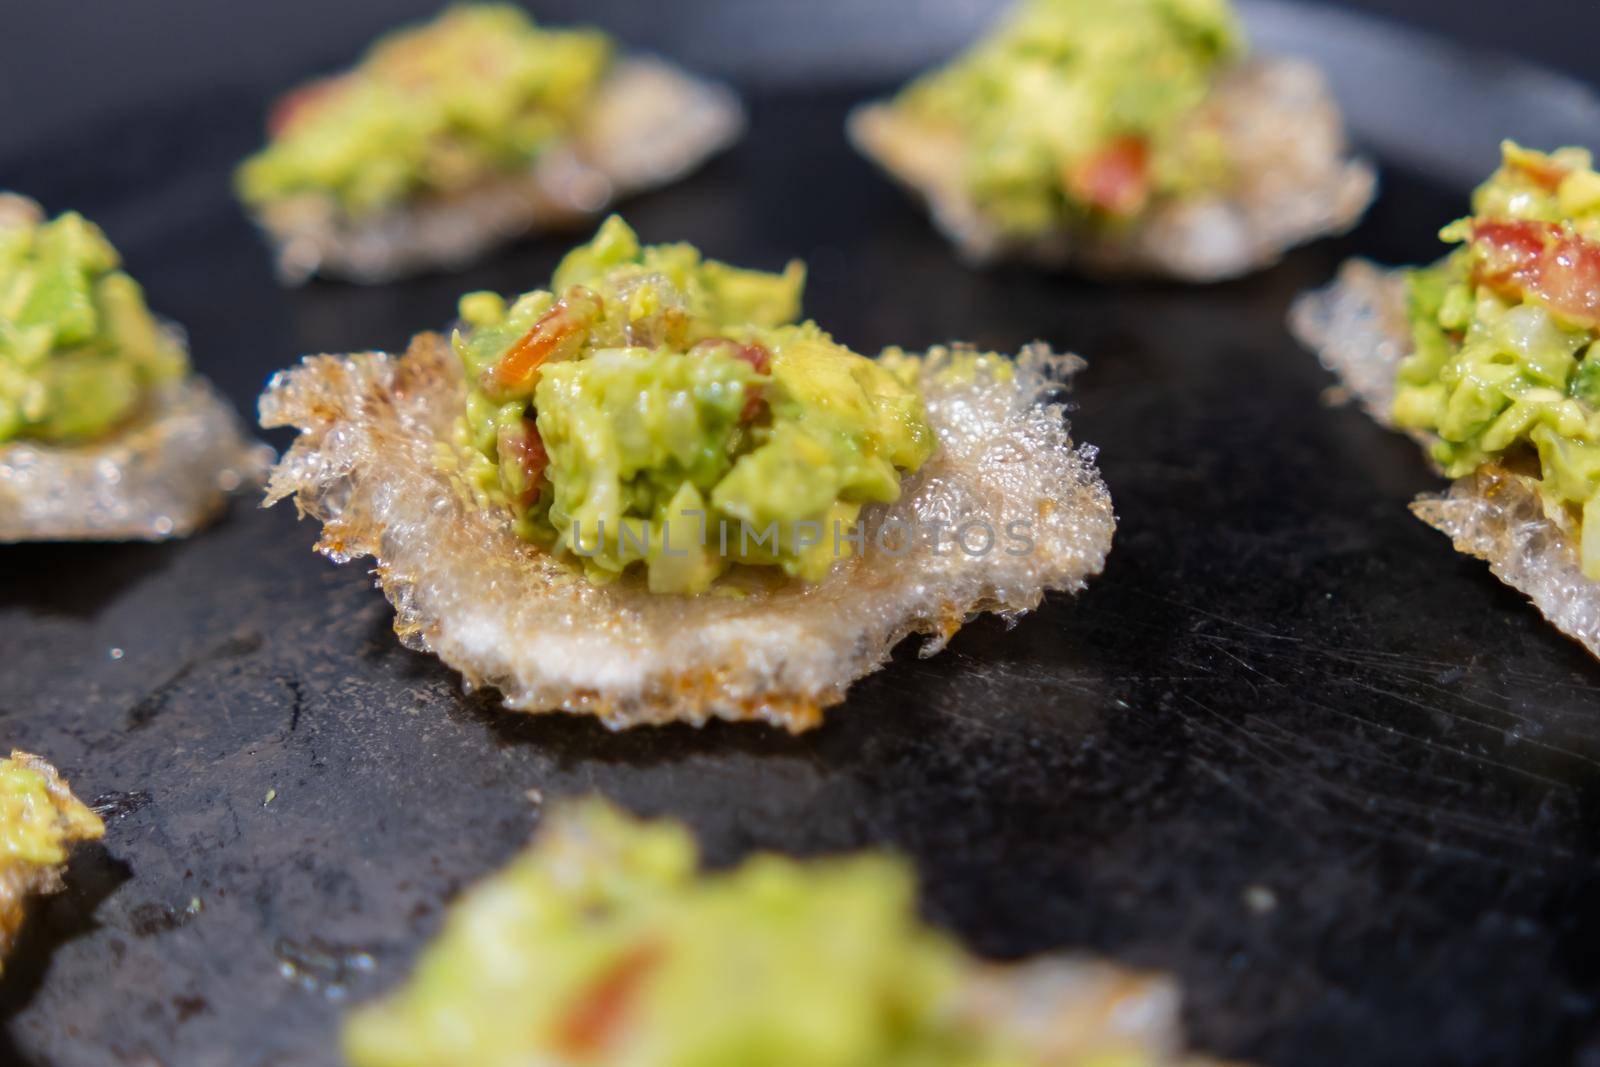 Close-up of delicious pork rinds with guacamole on traditional comal. Tasty avocado sauce on fried pork snacks above round griddle. Authentic Mexican food